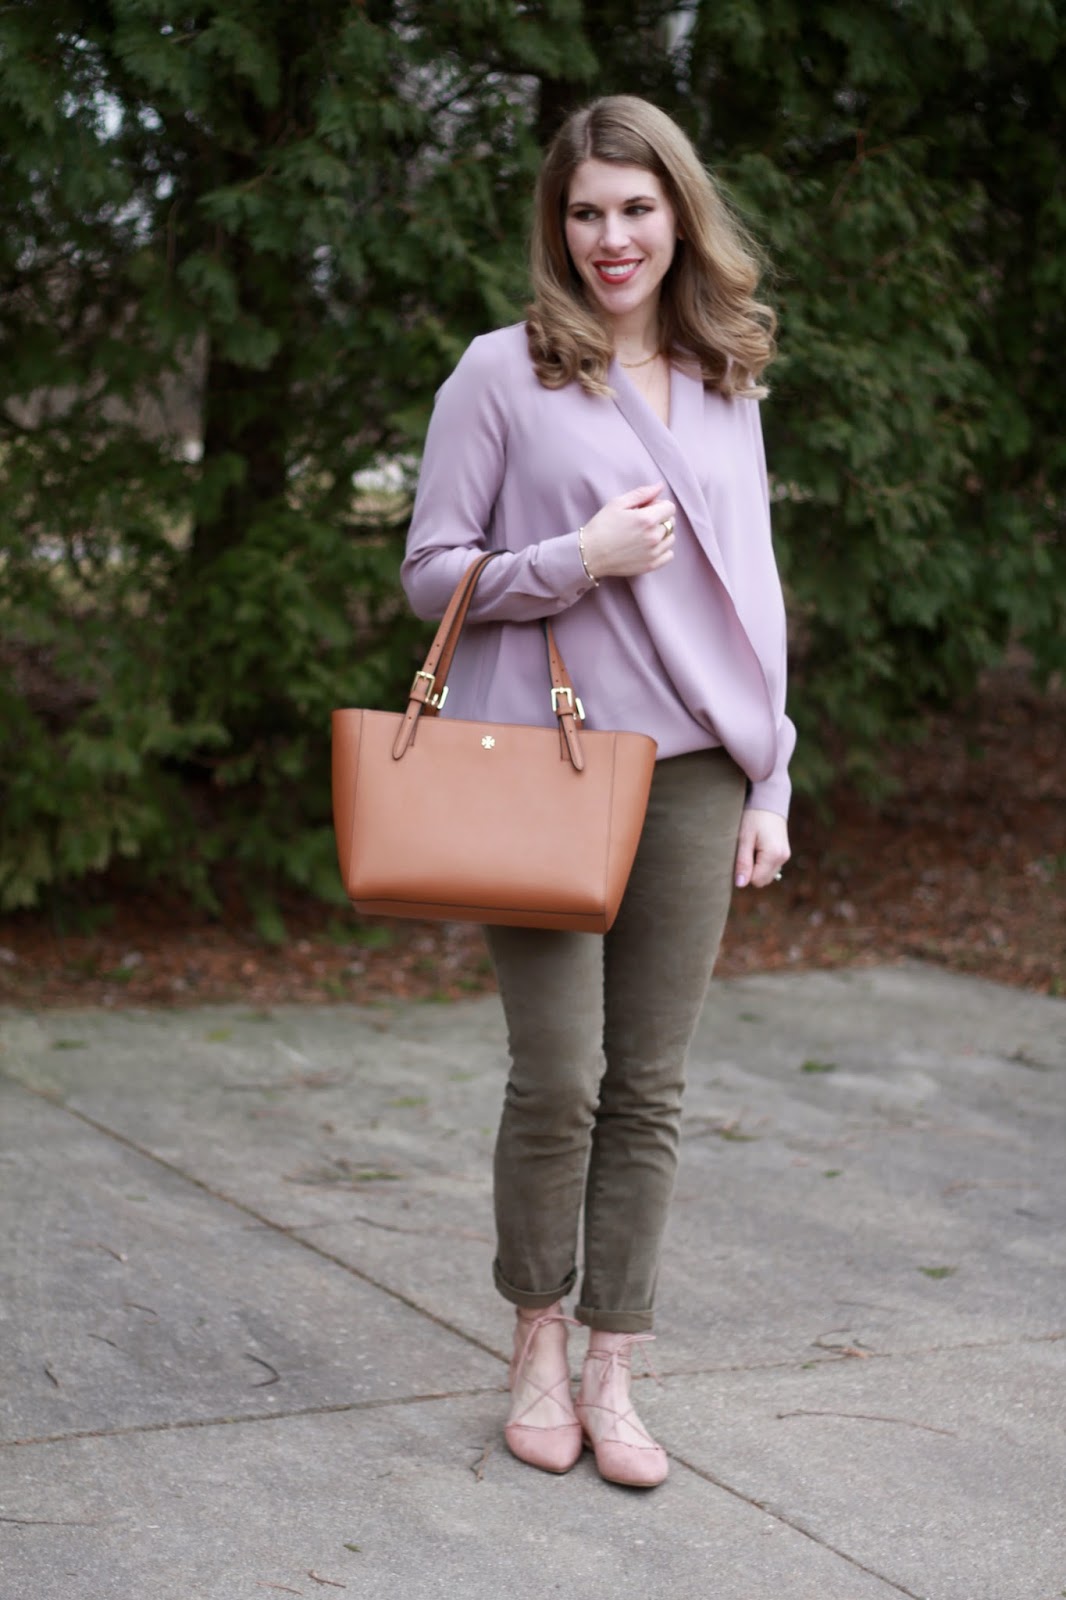 Crossover Blouse and Confident Twosday Linkup